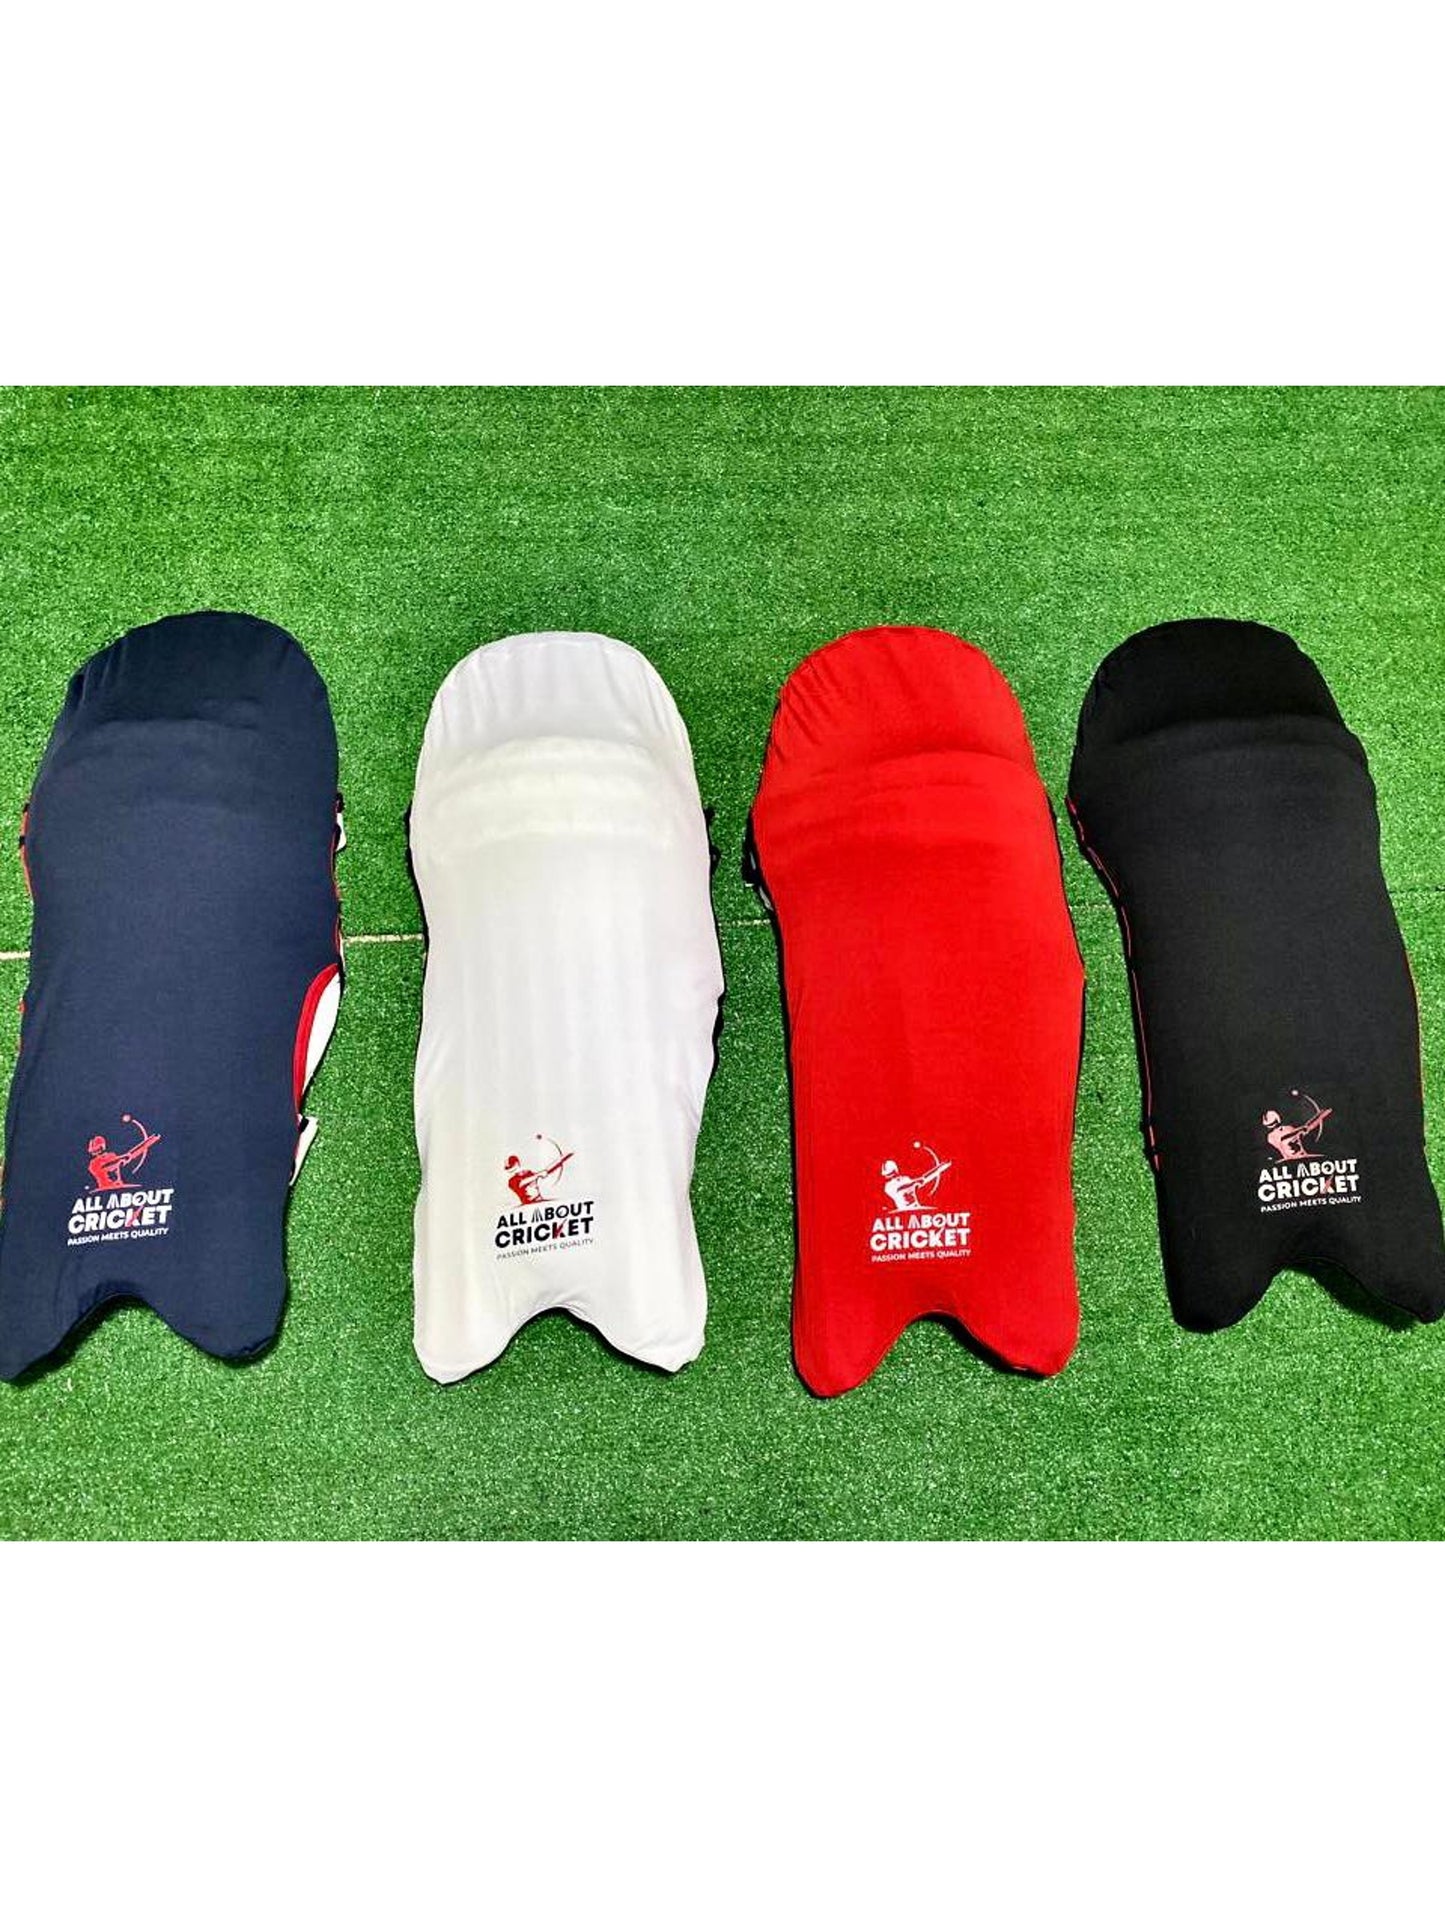 Cricket Pad Covers